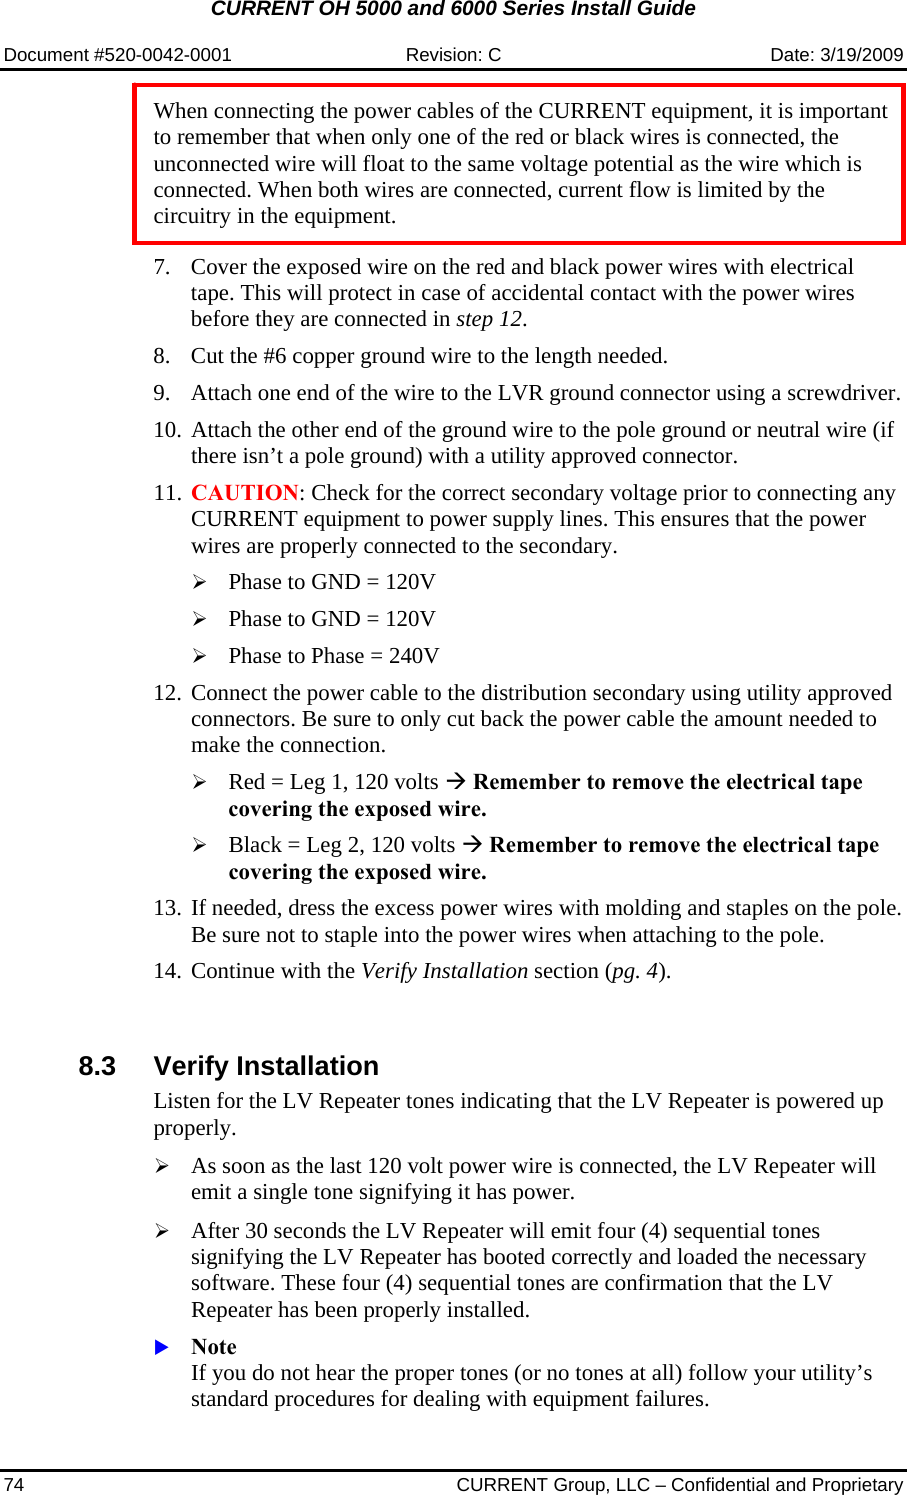 CURRENT OH 5000 and 6000 Series Install Guide  Document #520-0042-0001  Revision: C  Date: 3/19/2009 74  CURRENT Group, LLC – Confidential and Proprietary  When connecting the power cables of the CURRENT equipment, it is important to remember that when only one of the red or black wires is connected, the unconnected wire will float to the same voltage potential as the wire which is connected. When both wires are connected, current flow is limited by the circuitry in the equipment.   7. Cover the exposed wire on the red and black power wires with electrical tape. This will protect in case of accidental contact with the power wires before they are connected in step 12. 8. Cut the #6 copper ground wire to the length needed. 9. Attach one end of the wire to the LVR ground connector using a screwdriver. 10. Attach the other end of the ground wire to the pole ground or neutral wire (if there isn’t a pole ground) with a utility approved connector. 11. CAUTION: Check for the correct secondary voltage prior to connecting any CURRENT equipment to power supply lines. This ensures that the power wires are properly connected to the secondary. ¾ Phase to GND = 120V ¾ Phase to GND = 120V ¾ Phase to Phase = 240V 12. Connect the power cable to the distribution secondary using utility approved connectors. Be sure to only cut back the power cable the amount needed to make the connection. ¾ Red = Leg 1, 120 volts Æ Remember to remove the electrical tape covering the exposed wire. ¾ Black = Leg 2, 120 volts Æ Remember to remove the electrical tape covering the exposed wire. 13. If needed, dress the excess power wires with molding and staples on the pole. Be sure not to staple into the power wires when attaching to the pole. 14. Continue with the Verify Installation section (pg. 4).    8.3 Verify Installation  Listen for the LV Repeater tones indicating that the LV Repeater is powered up properly.   ¾ As soon as the last 120 volt power wire is connected, the LV Repeater will emit a single tone signifying it has power.  ¾ After 30 seconds the LV Repeater will emit four (4) sequential tones signifying the LV Repeater has booted correctly and loaded the necessary software. These four (4) sequential tones are confirmation that the LV Repeater has been properly installed. X Note If you do not hear the proper tones (or no tones at all) follow your utility’s standard procedures for dealing with equipment failures.   